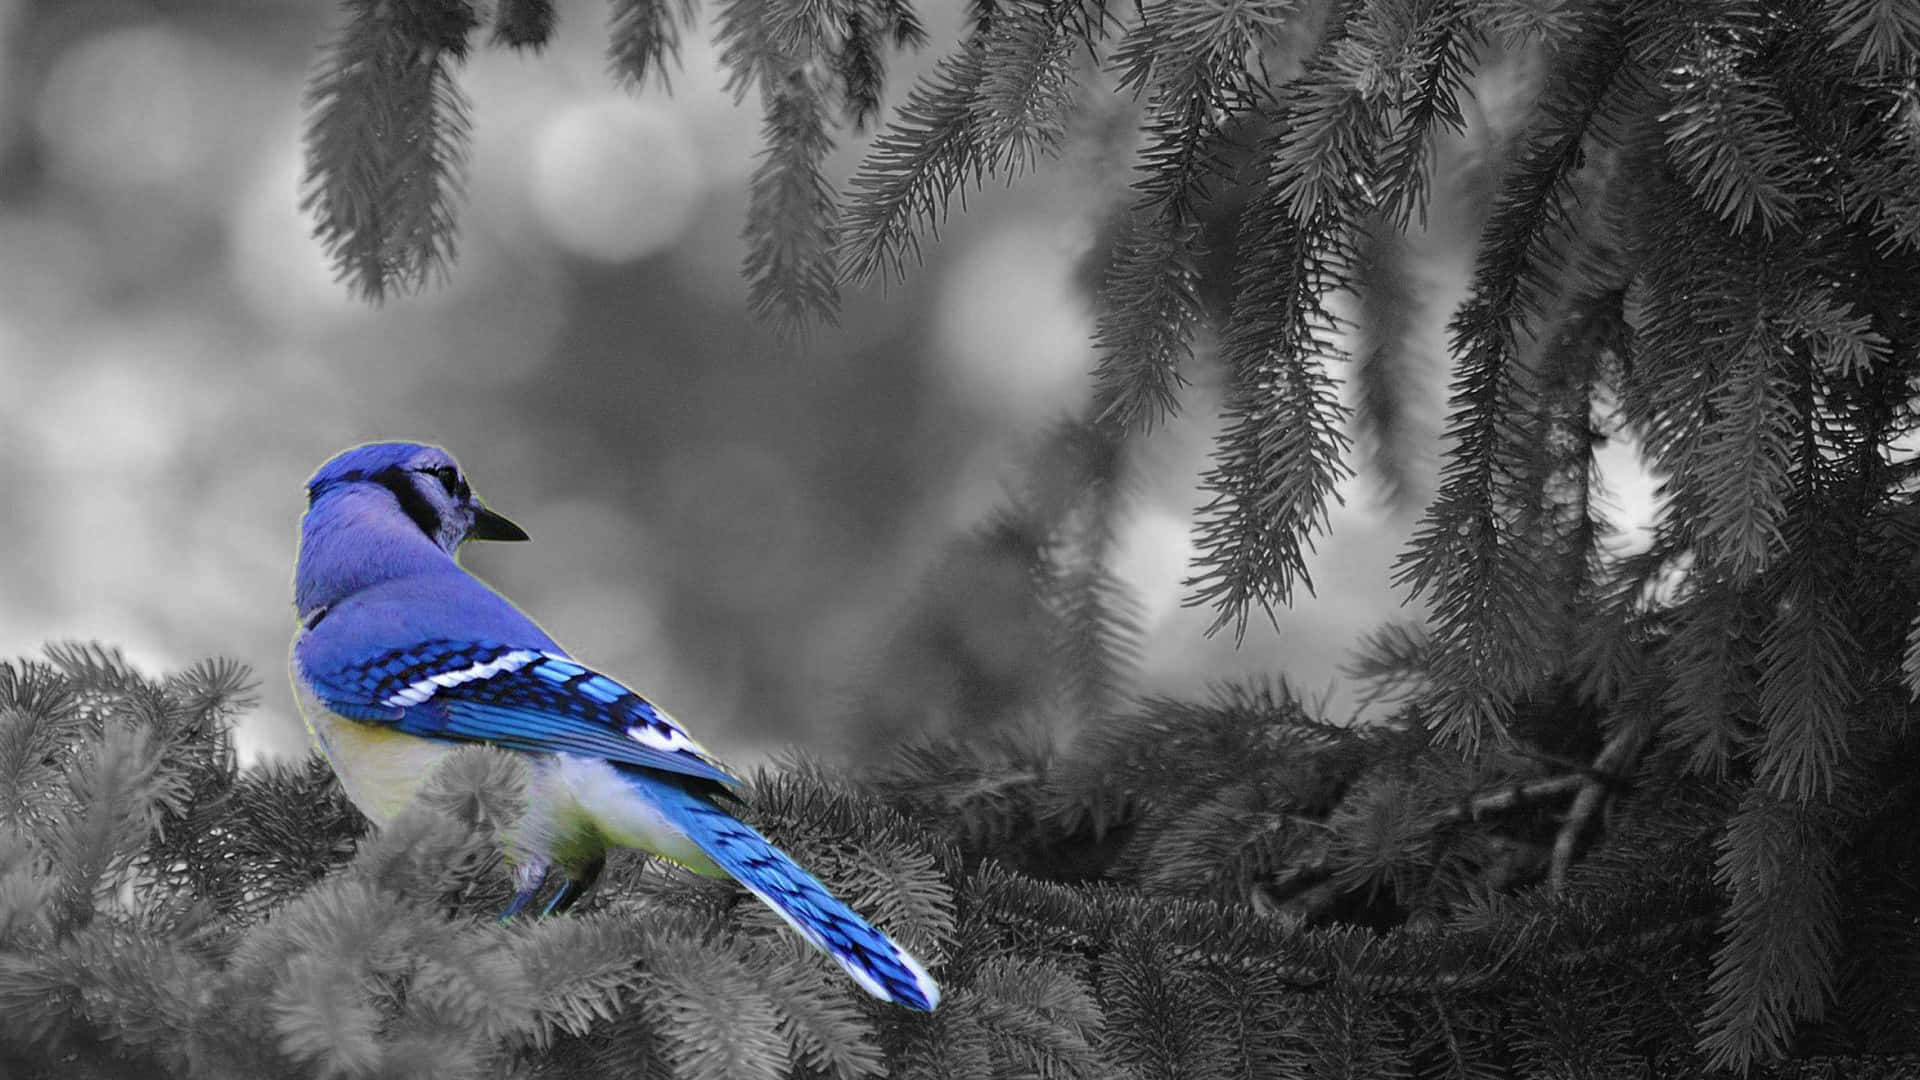 A beautiful Blue Jay resting in its natural habitat